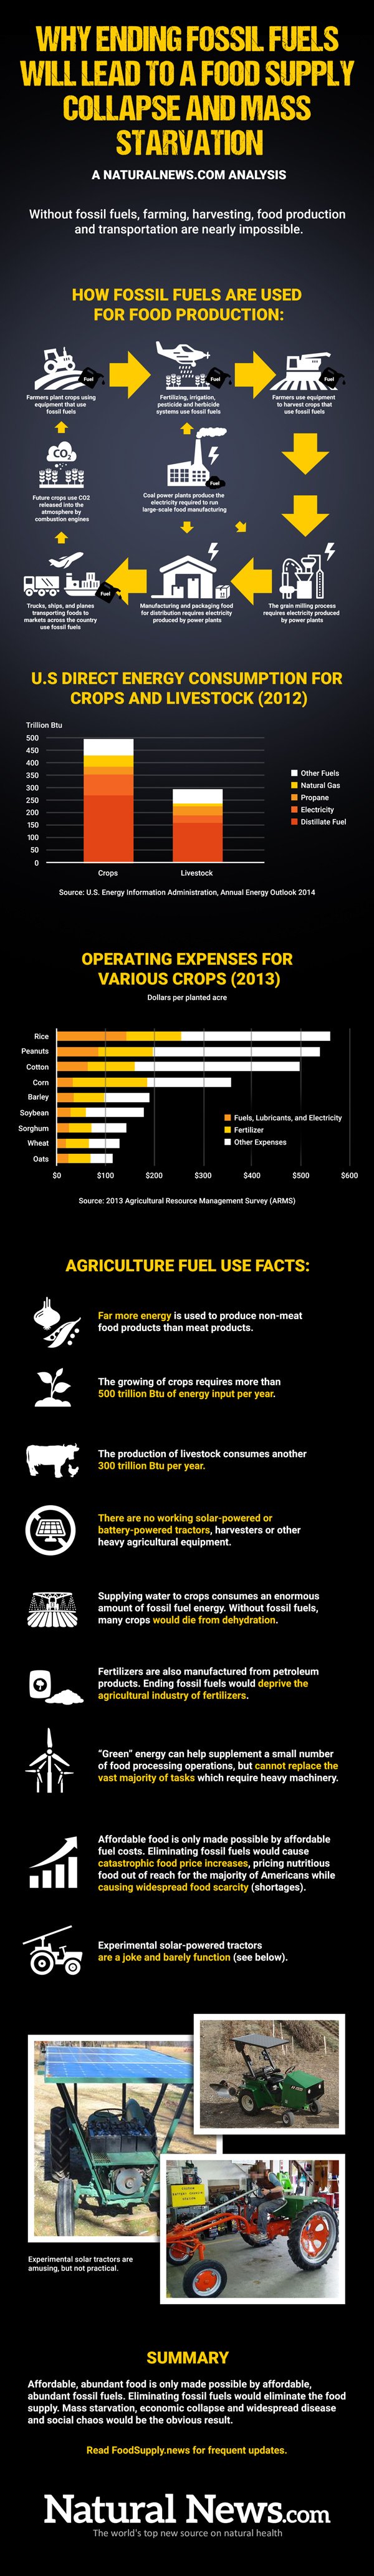 Infographic-Ending-Fossil-Fuels-Lead-to-Collapse-Starvation-600.jpg